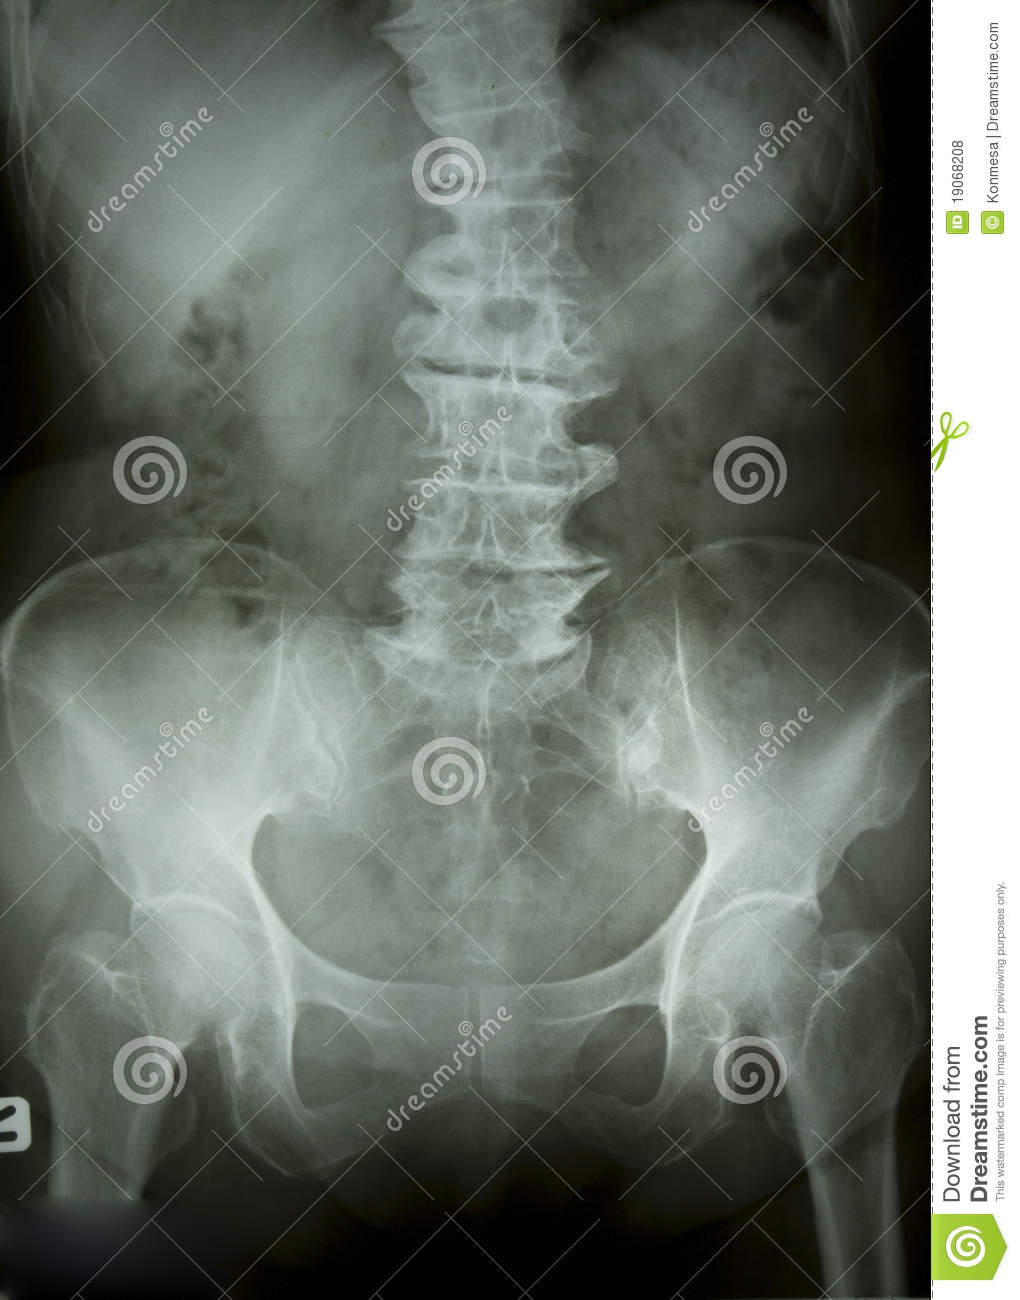 Chest X Ray Royalty Free Stock Photos   Image  19068208